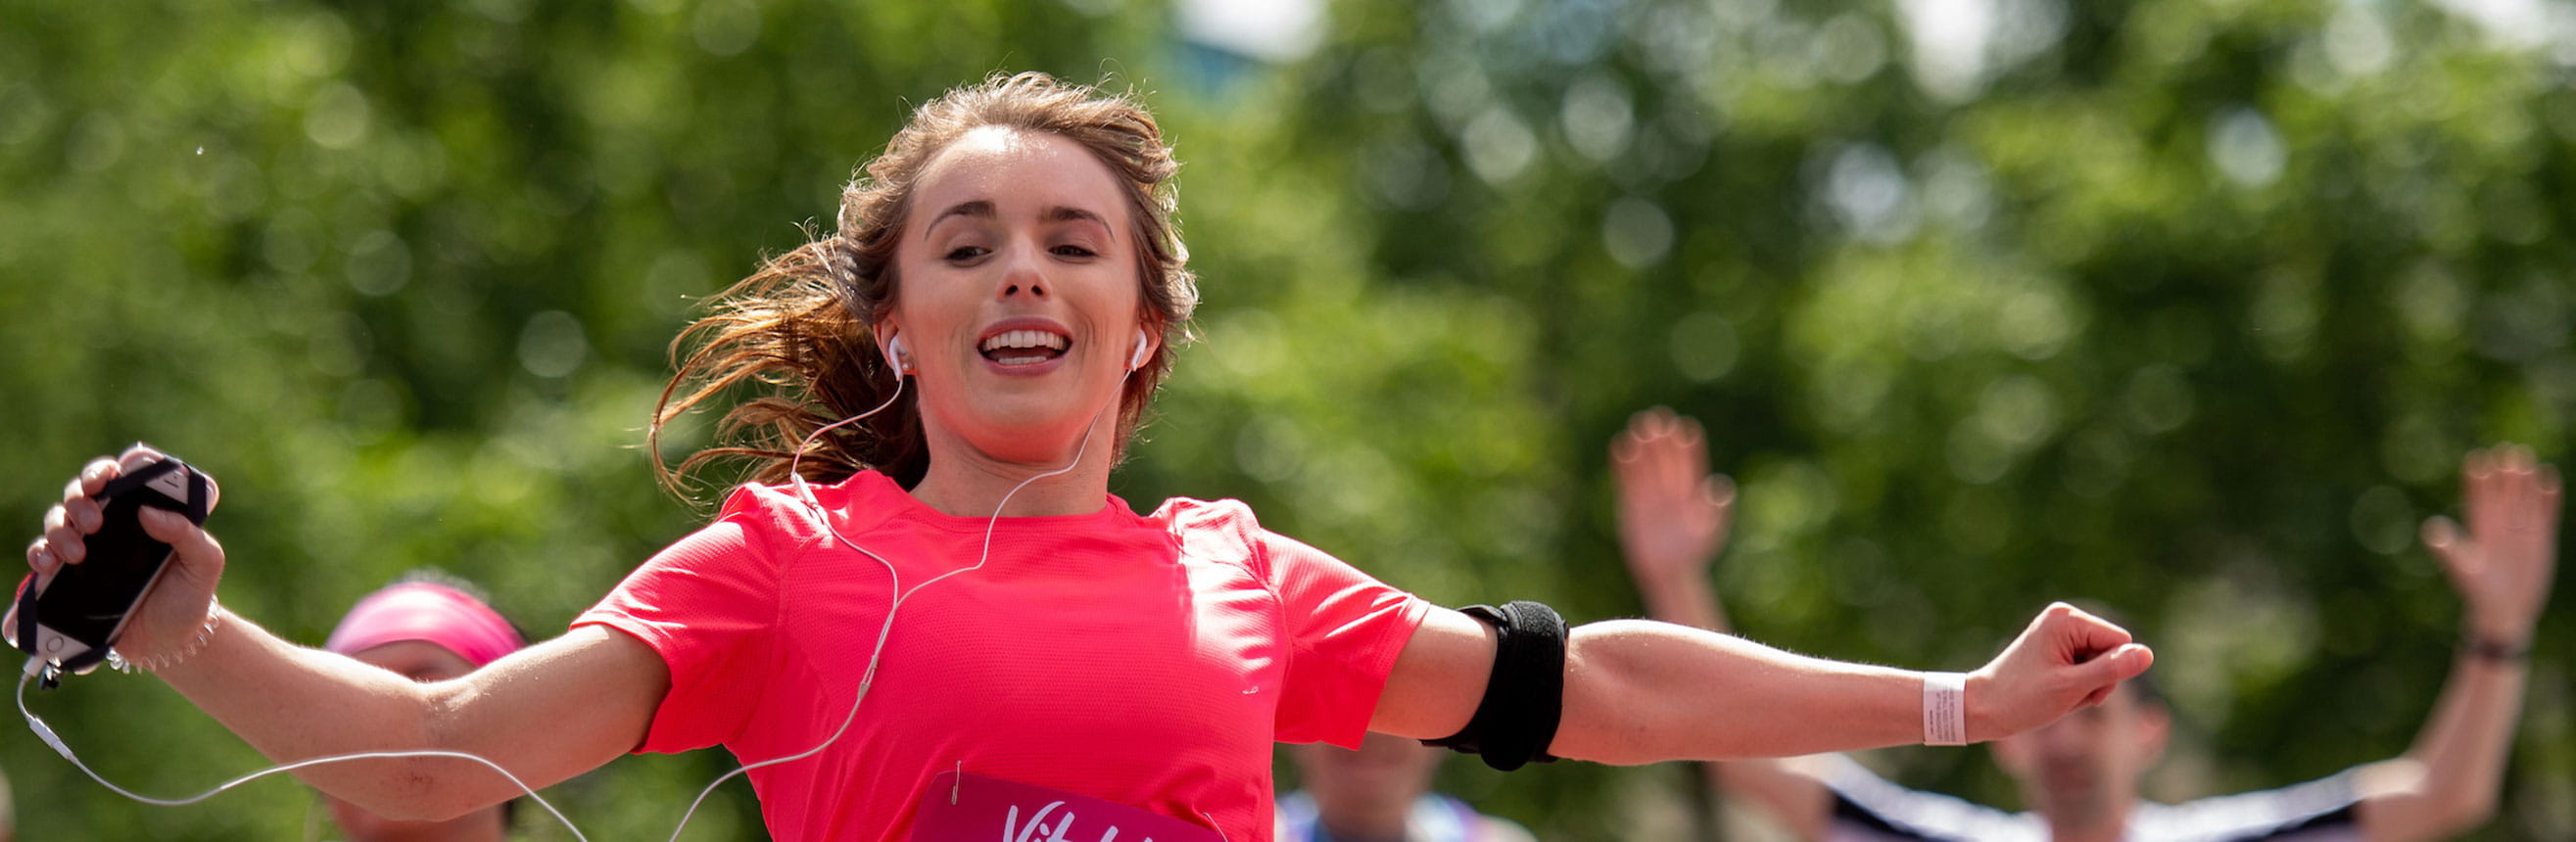 Runners celebrate as they approach the finish line of The Vitality London 10,000